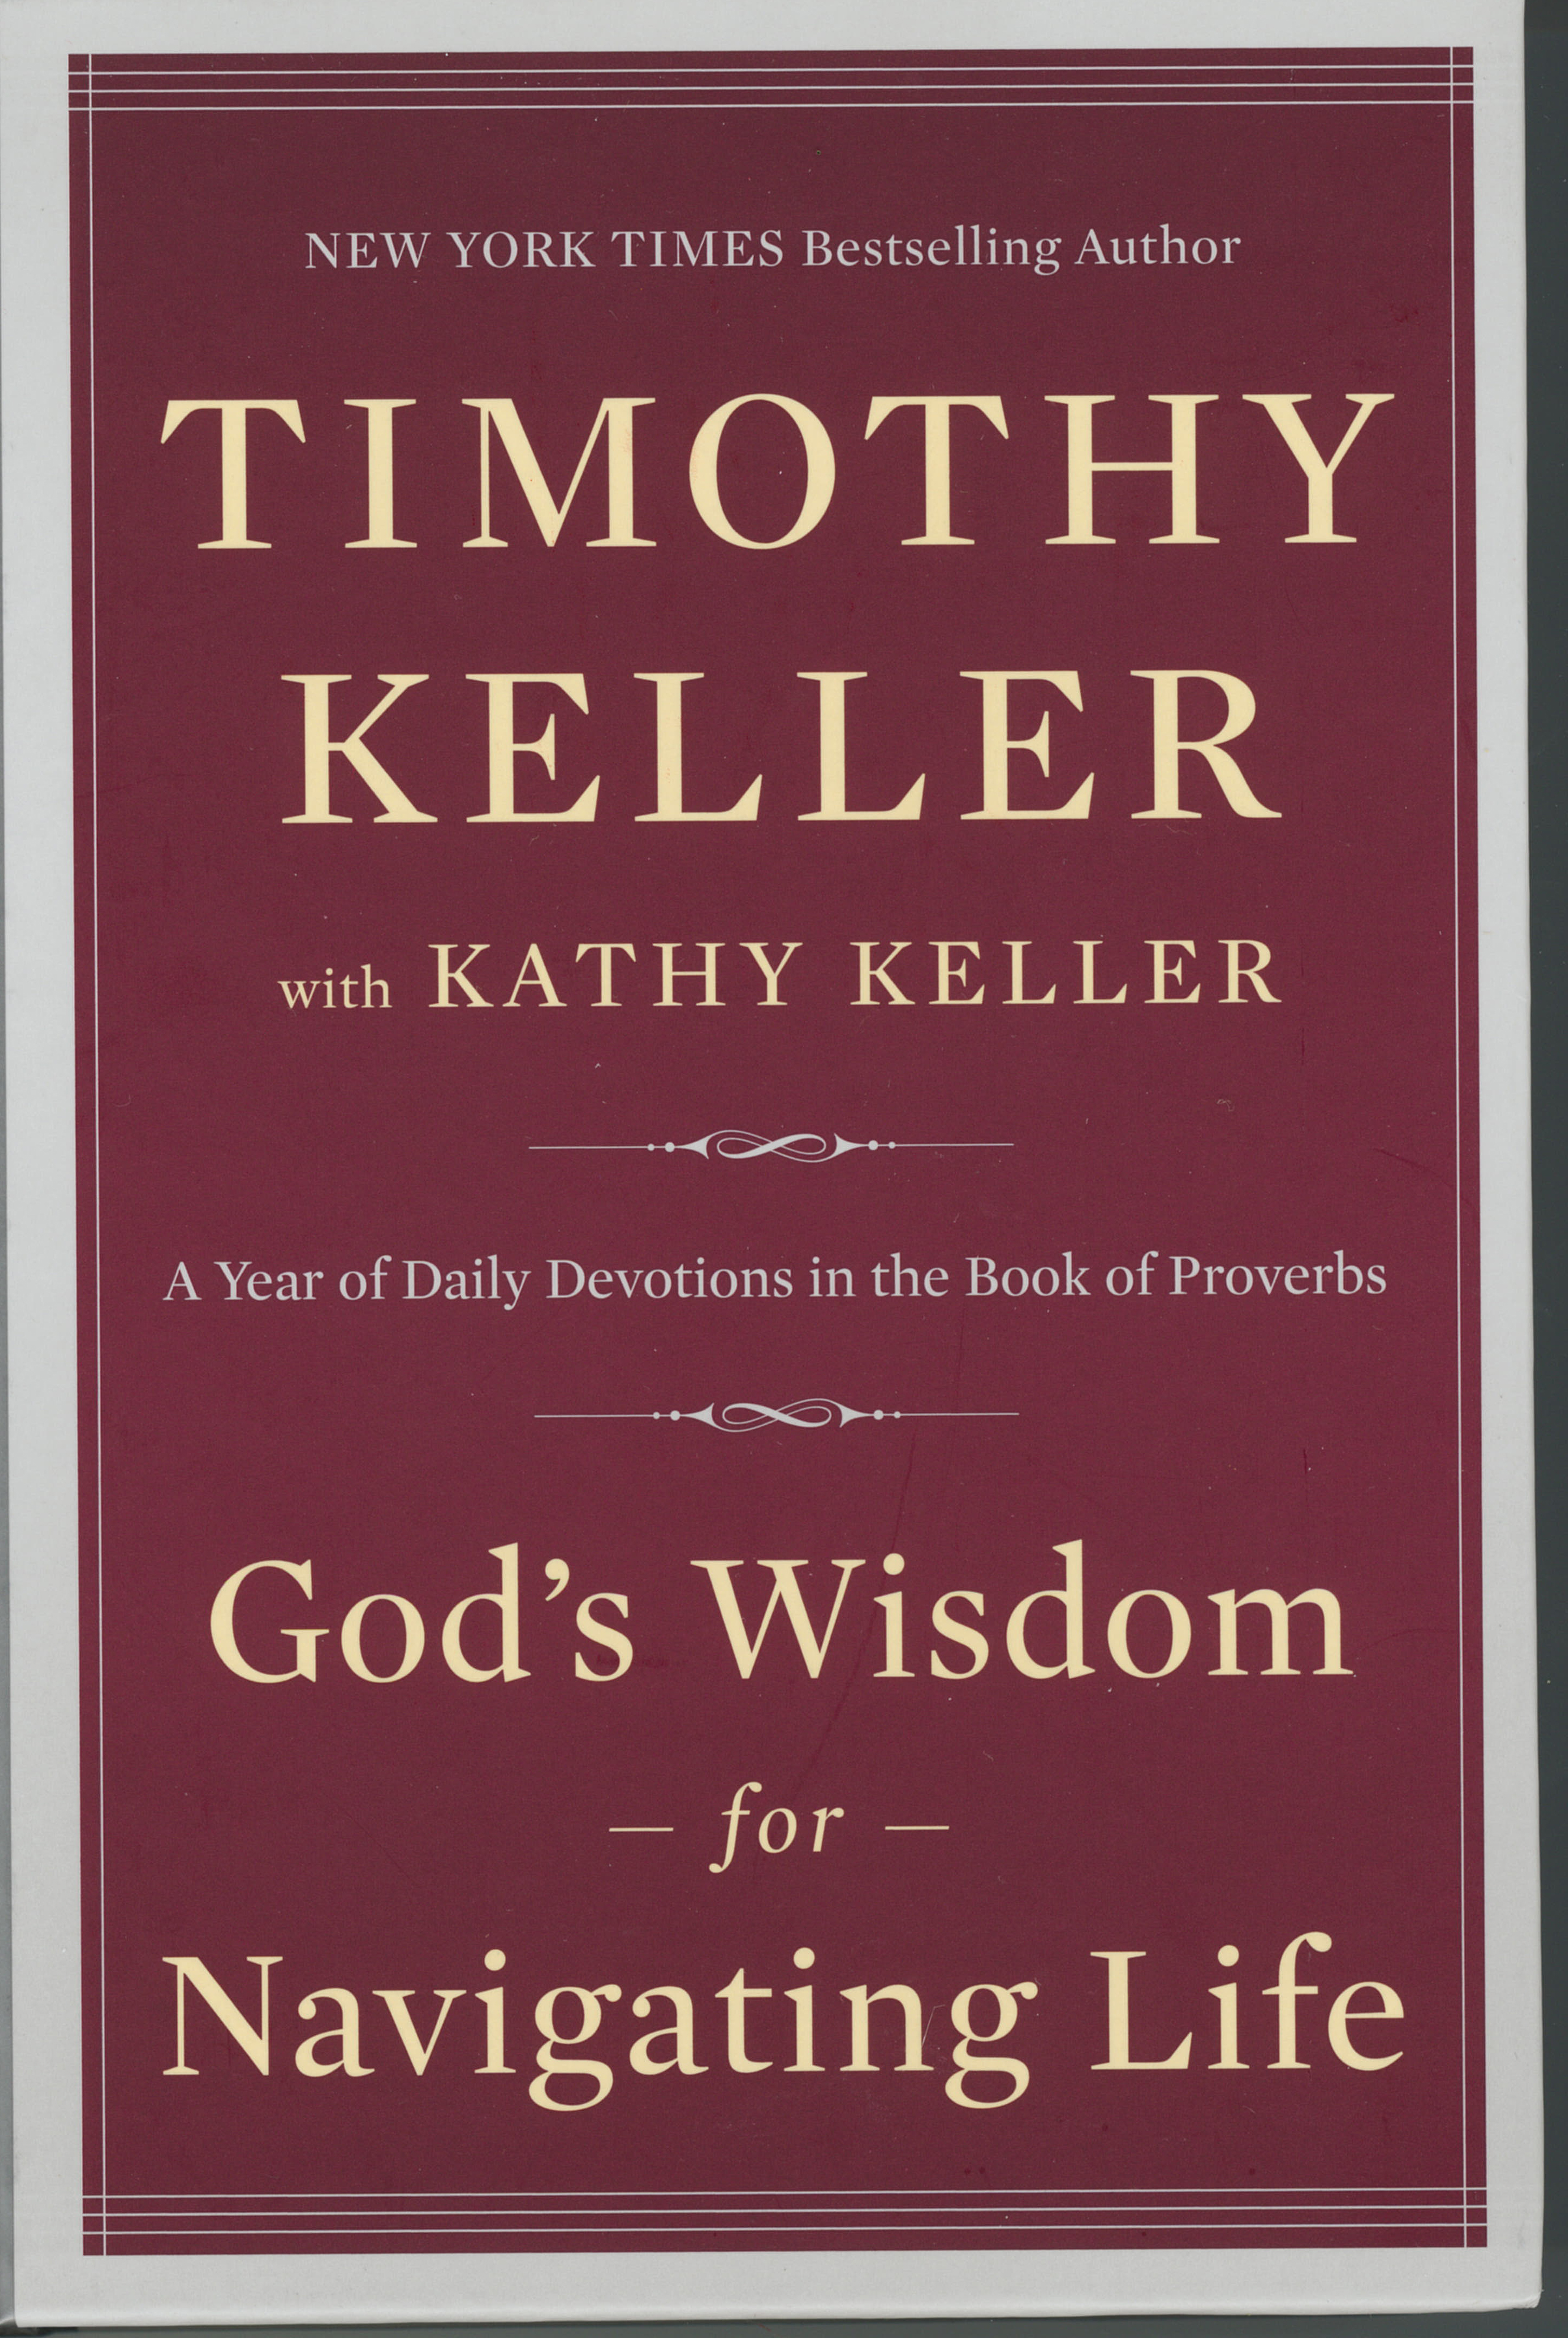 365-day devotional titled God's Wisdom for Navigating Life: A Year of Daily Devotions in the Book of Proverbs by Timothy Keller 9780735222090